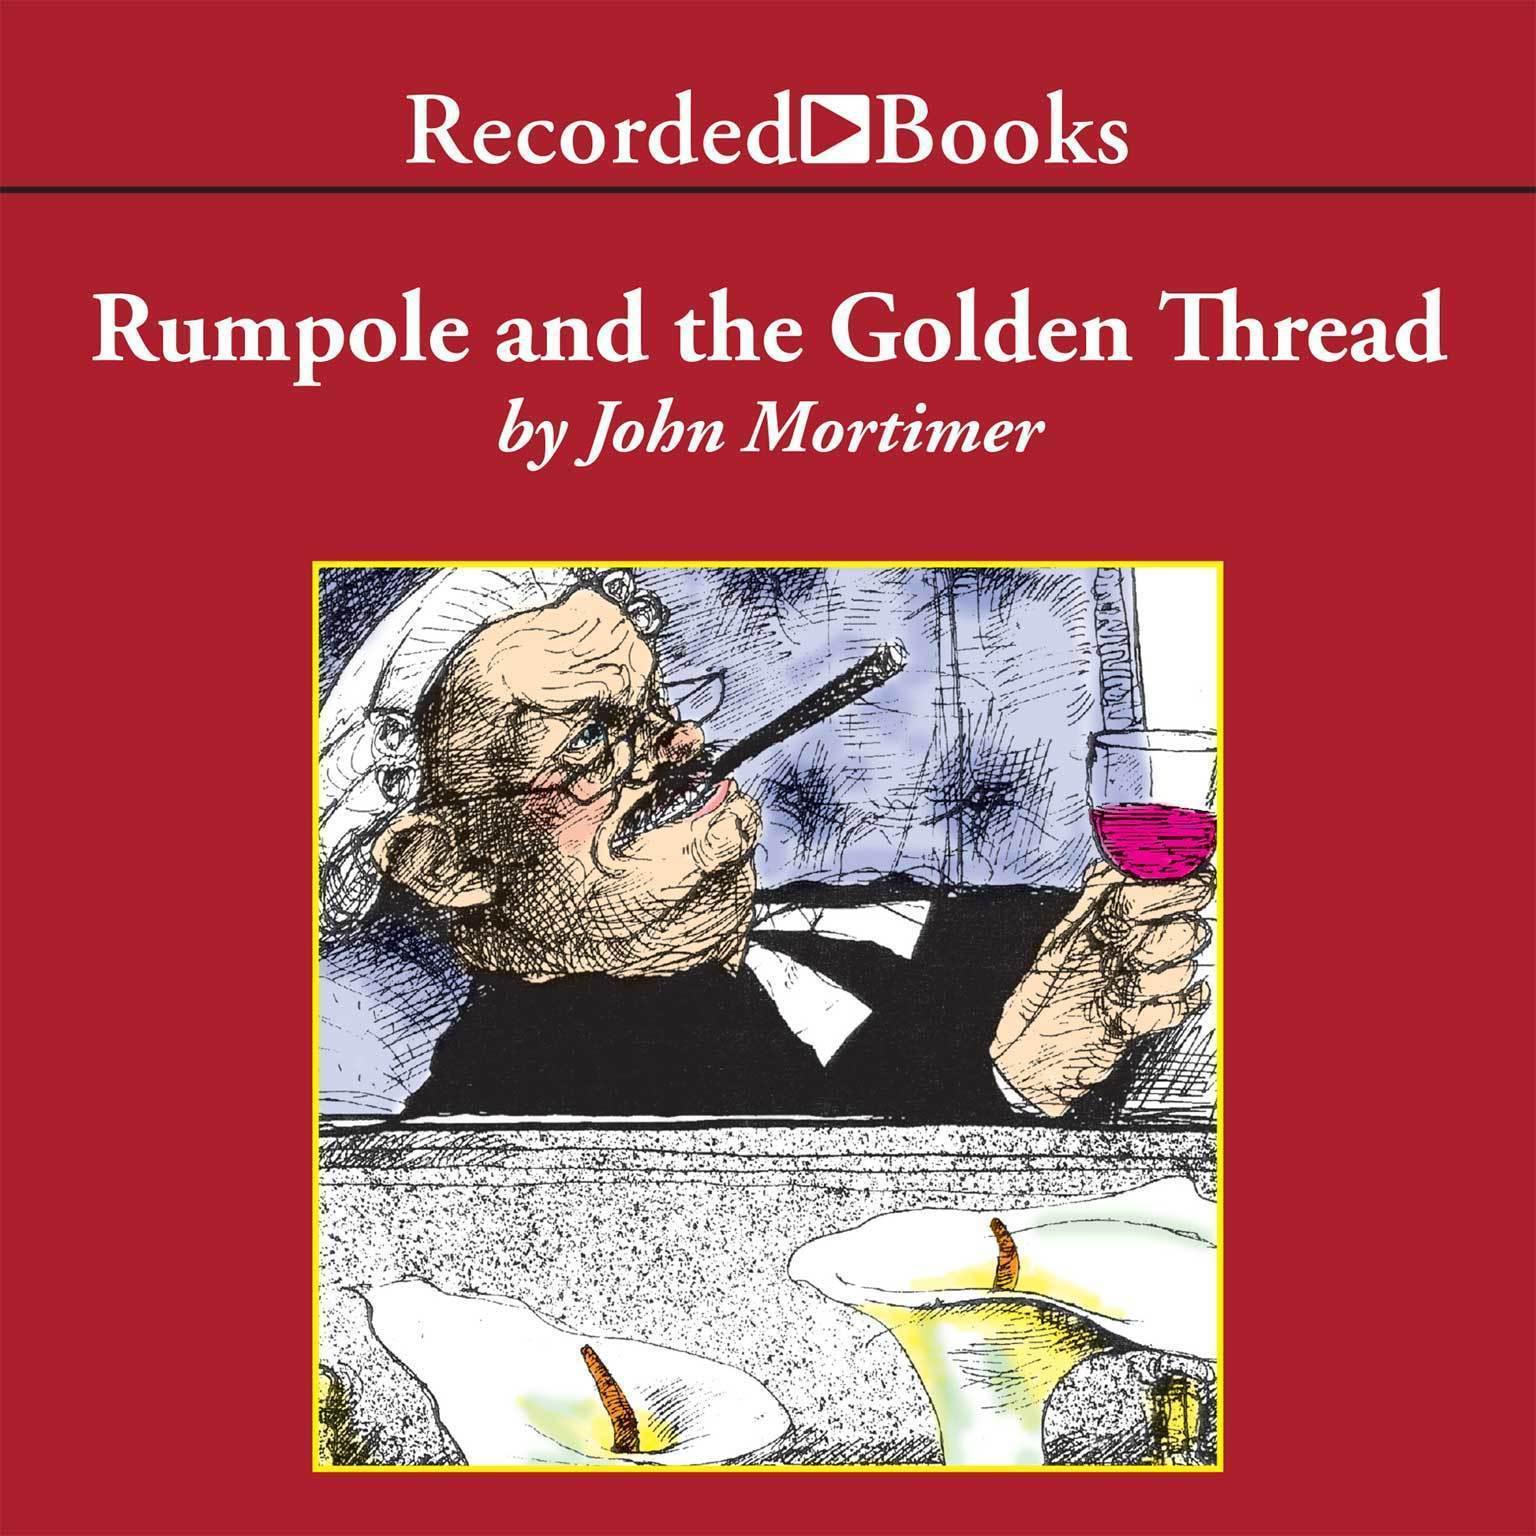 Rumpole and the Golden Thread Audiobook, by John Mortimer